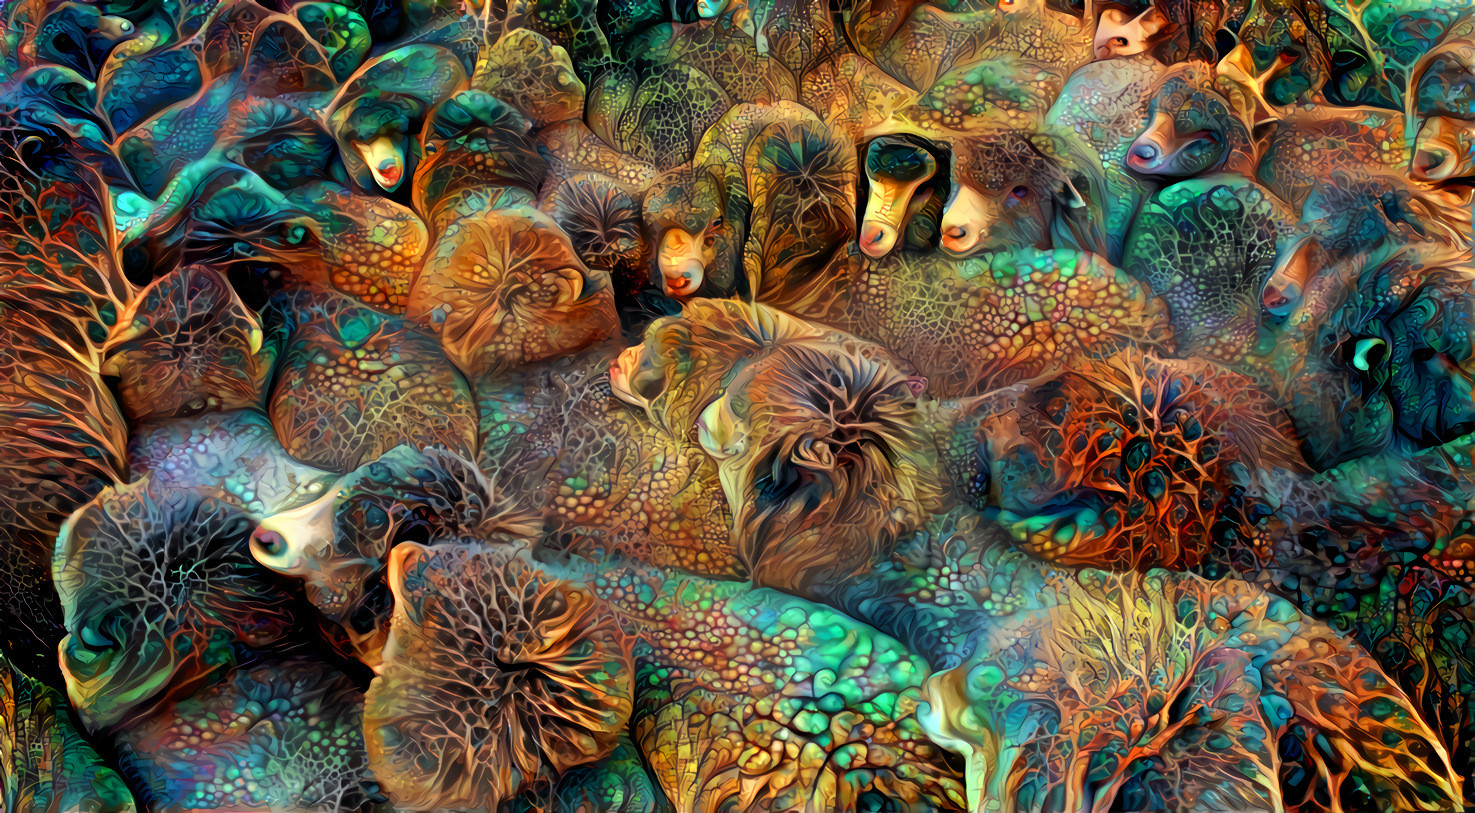 Chromatic Sheep (Image by skeeze from Pixabay)